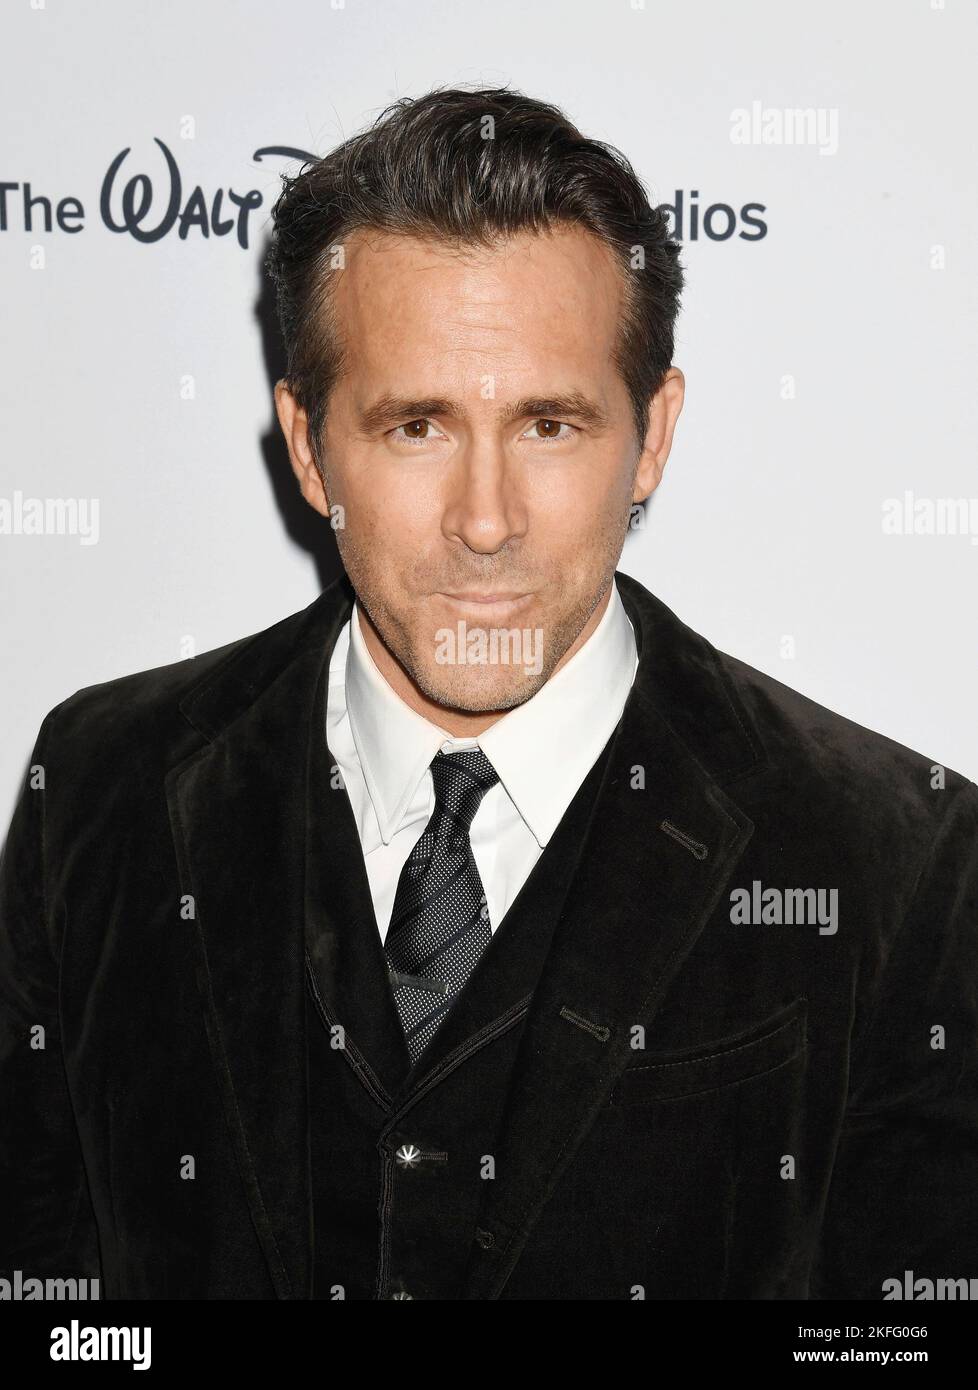 BEVERLY HILLS, CALIFORNIA - NOVEMBER 17: Honoree Ryan Reynolds attends the 36th Annual American Cinematheque Award Ceremony honoring Ryan Reynolds at Stock Photo